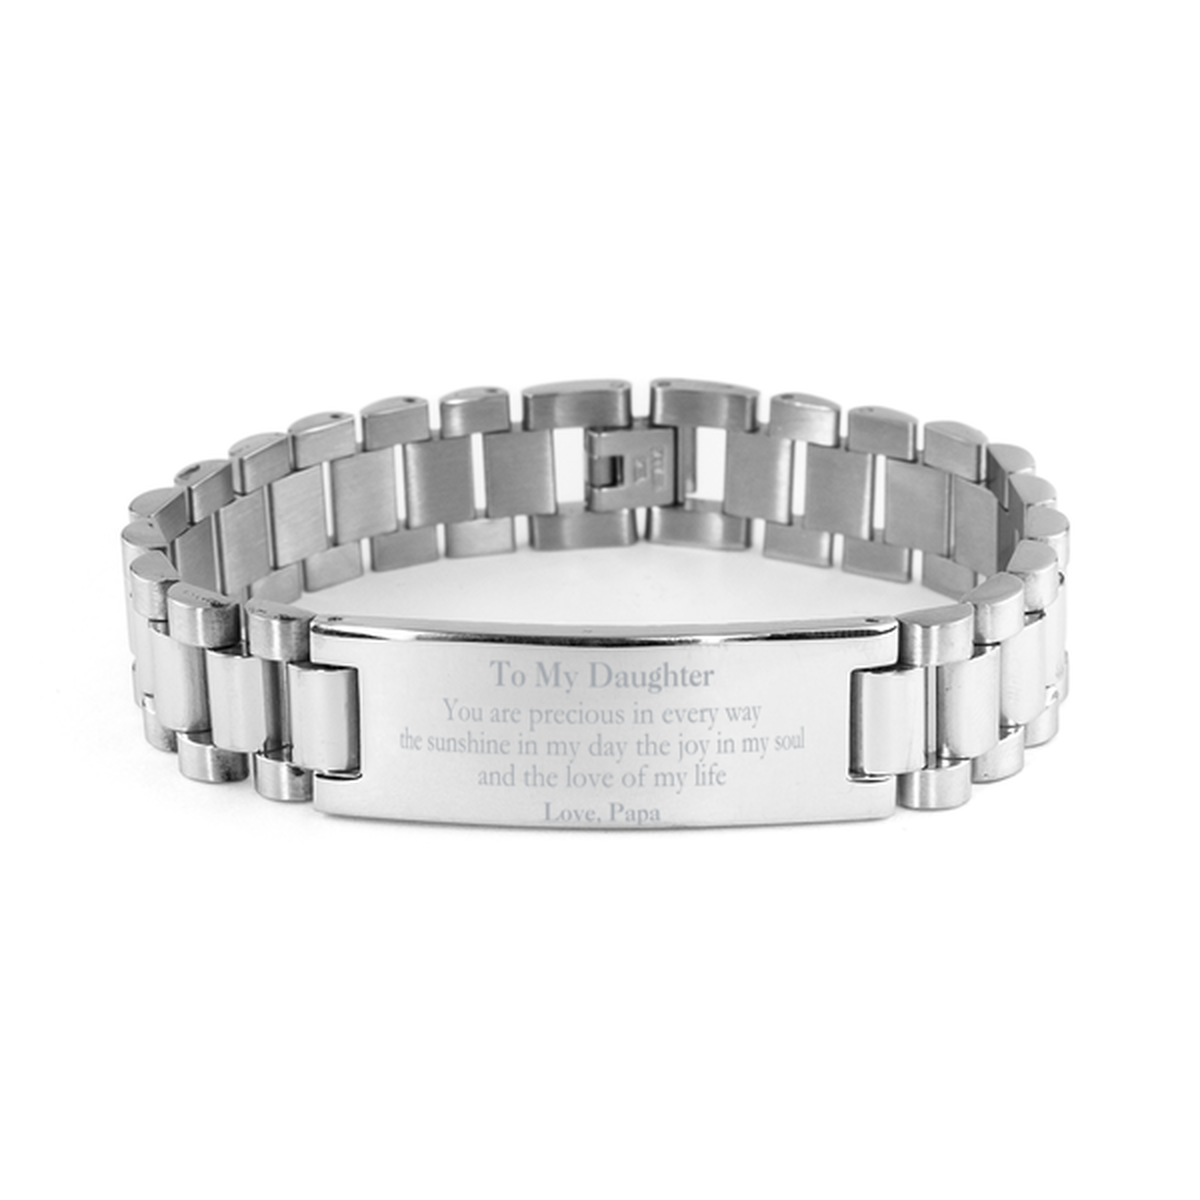 Graduation Gifts for Daughter Ladder Stainless Steel Bracelet Present from Papa, Christmas Daughter Birthday Gifts Daughter You are precious in every way the sunshine in my day. Love, Papa